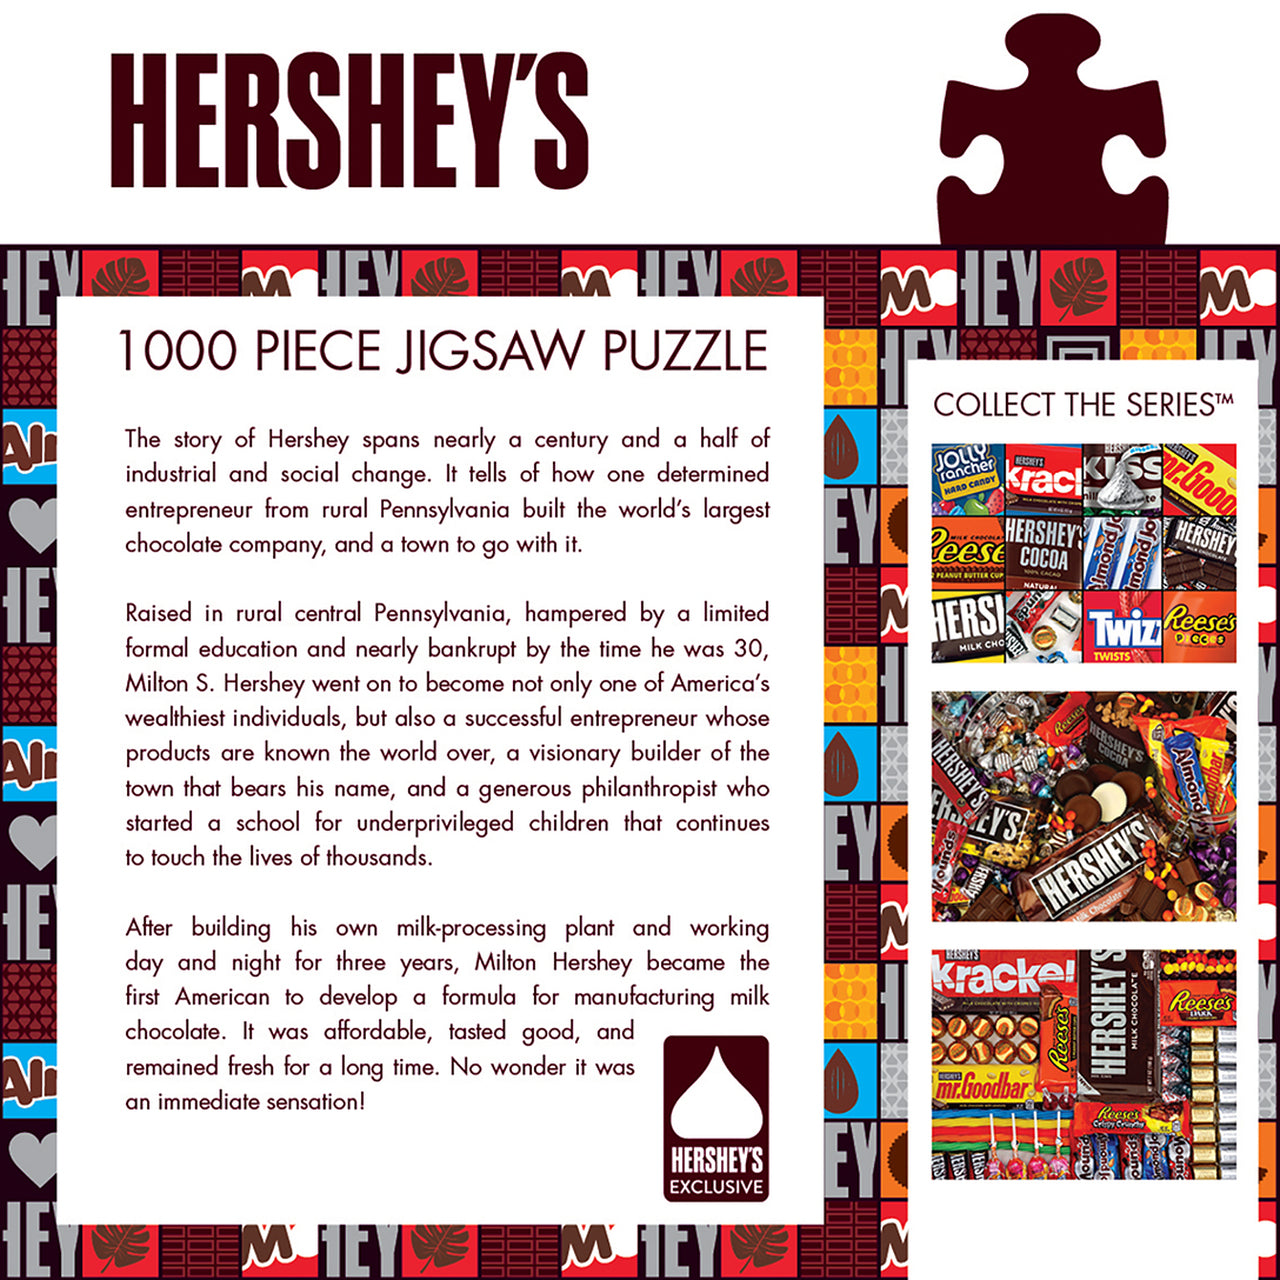 Hershey's Swirl - Chocolate Collage 1000 Piece Jigsaw Puzzle by Masterpieces